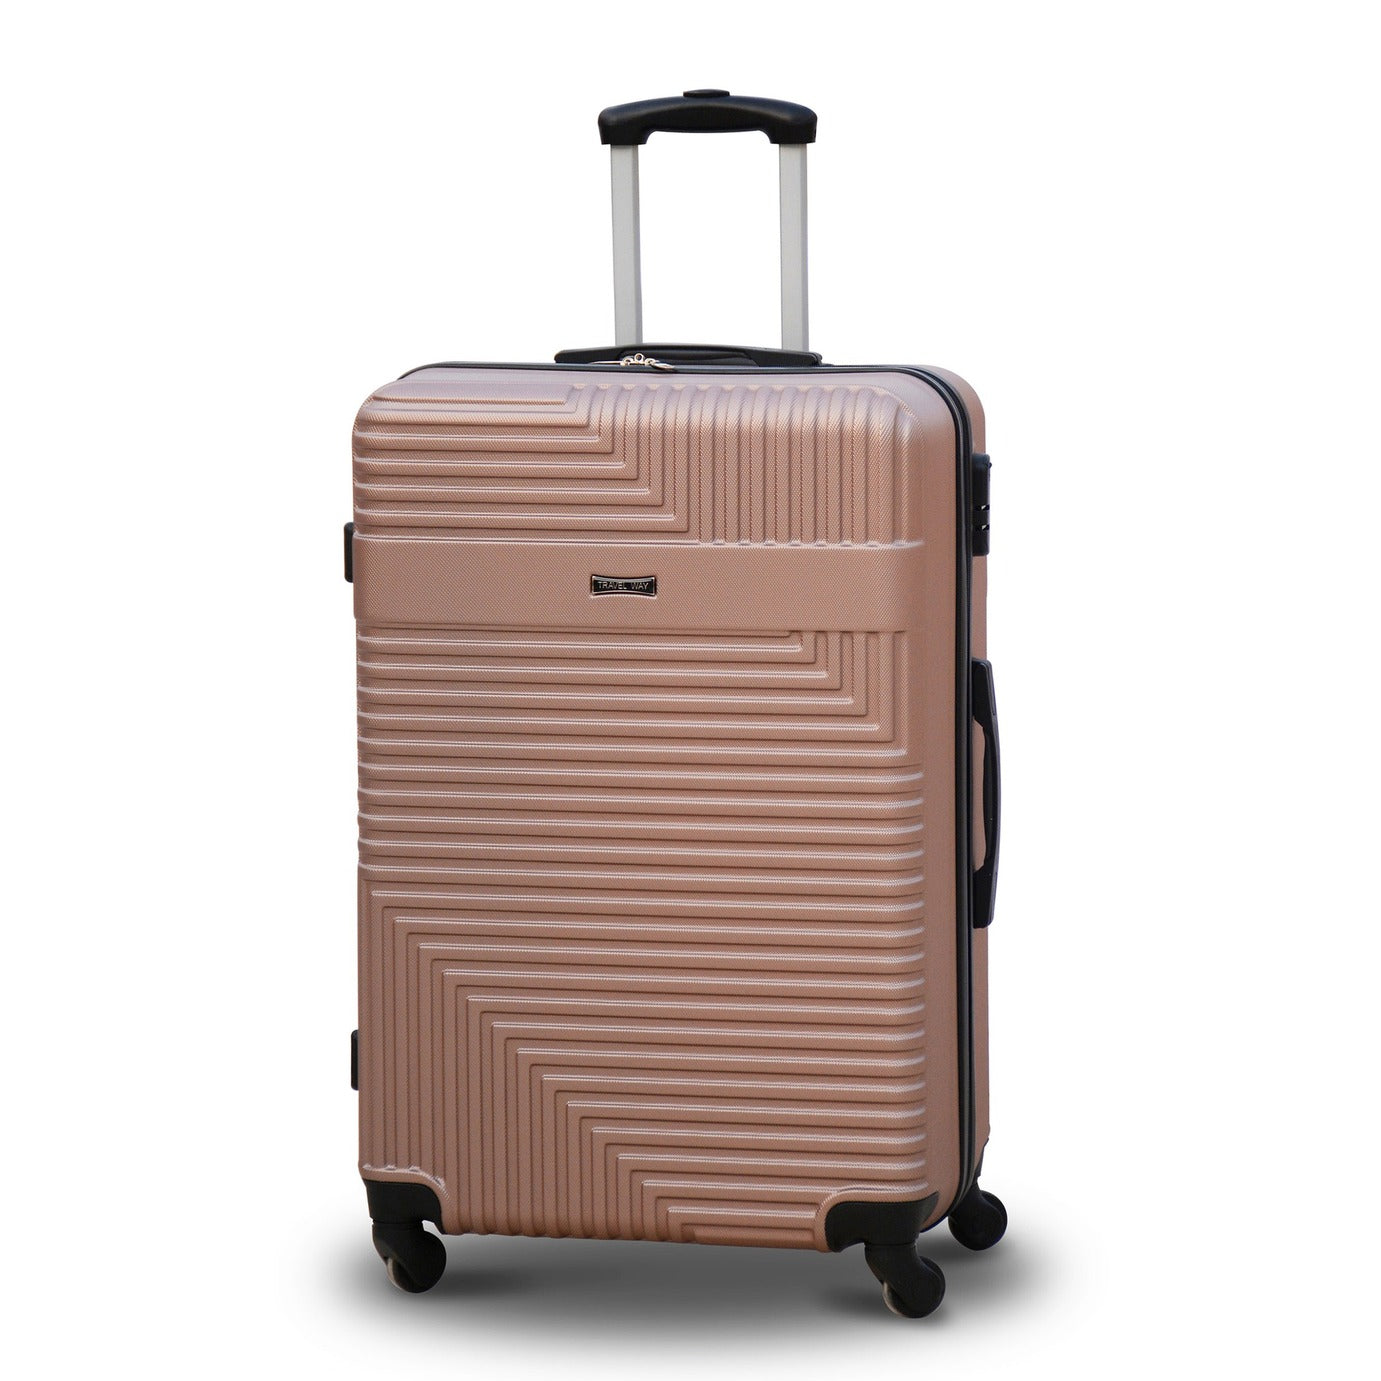 32" Rose Gold Colour Travel Way ABS Luggage Lightweight Hard Case Trolley Bag with Spinner Wheel zaappy.com